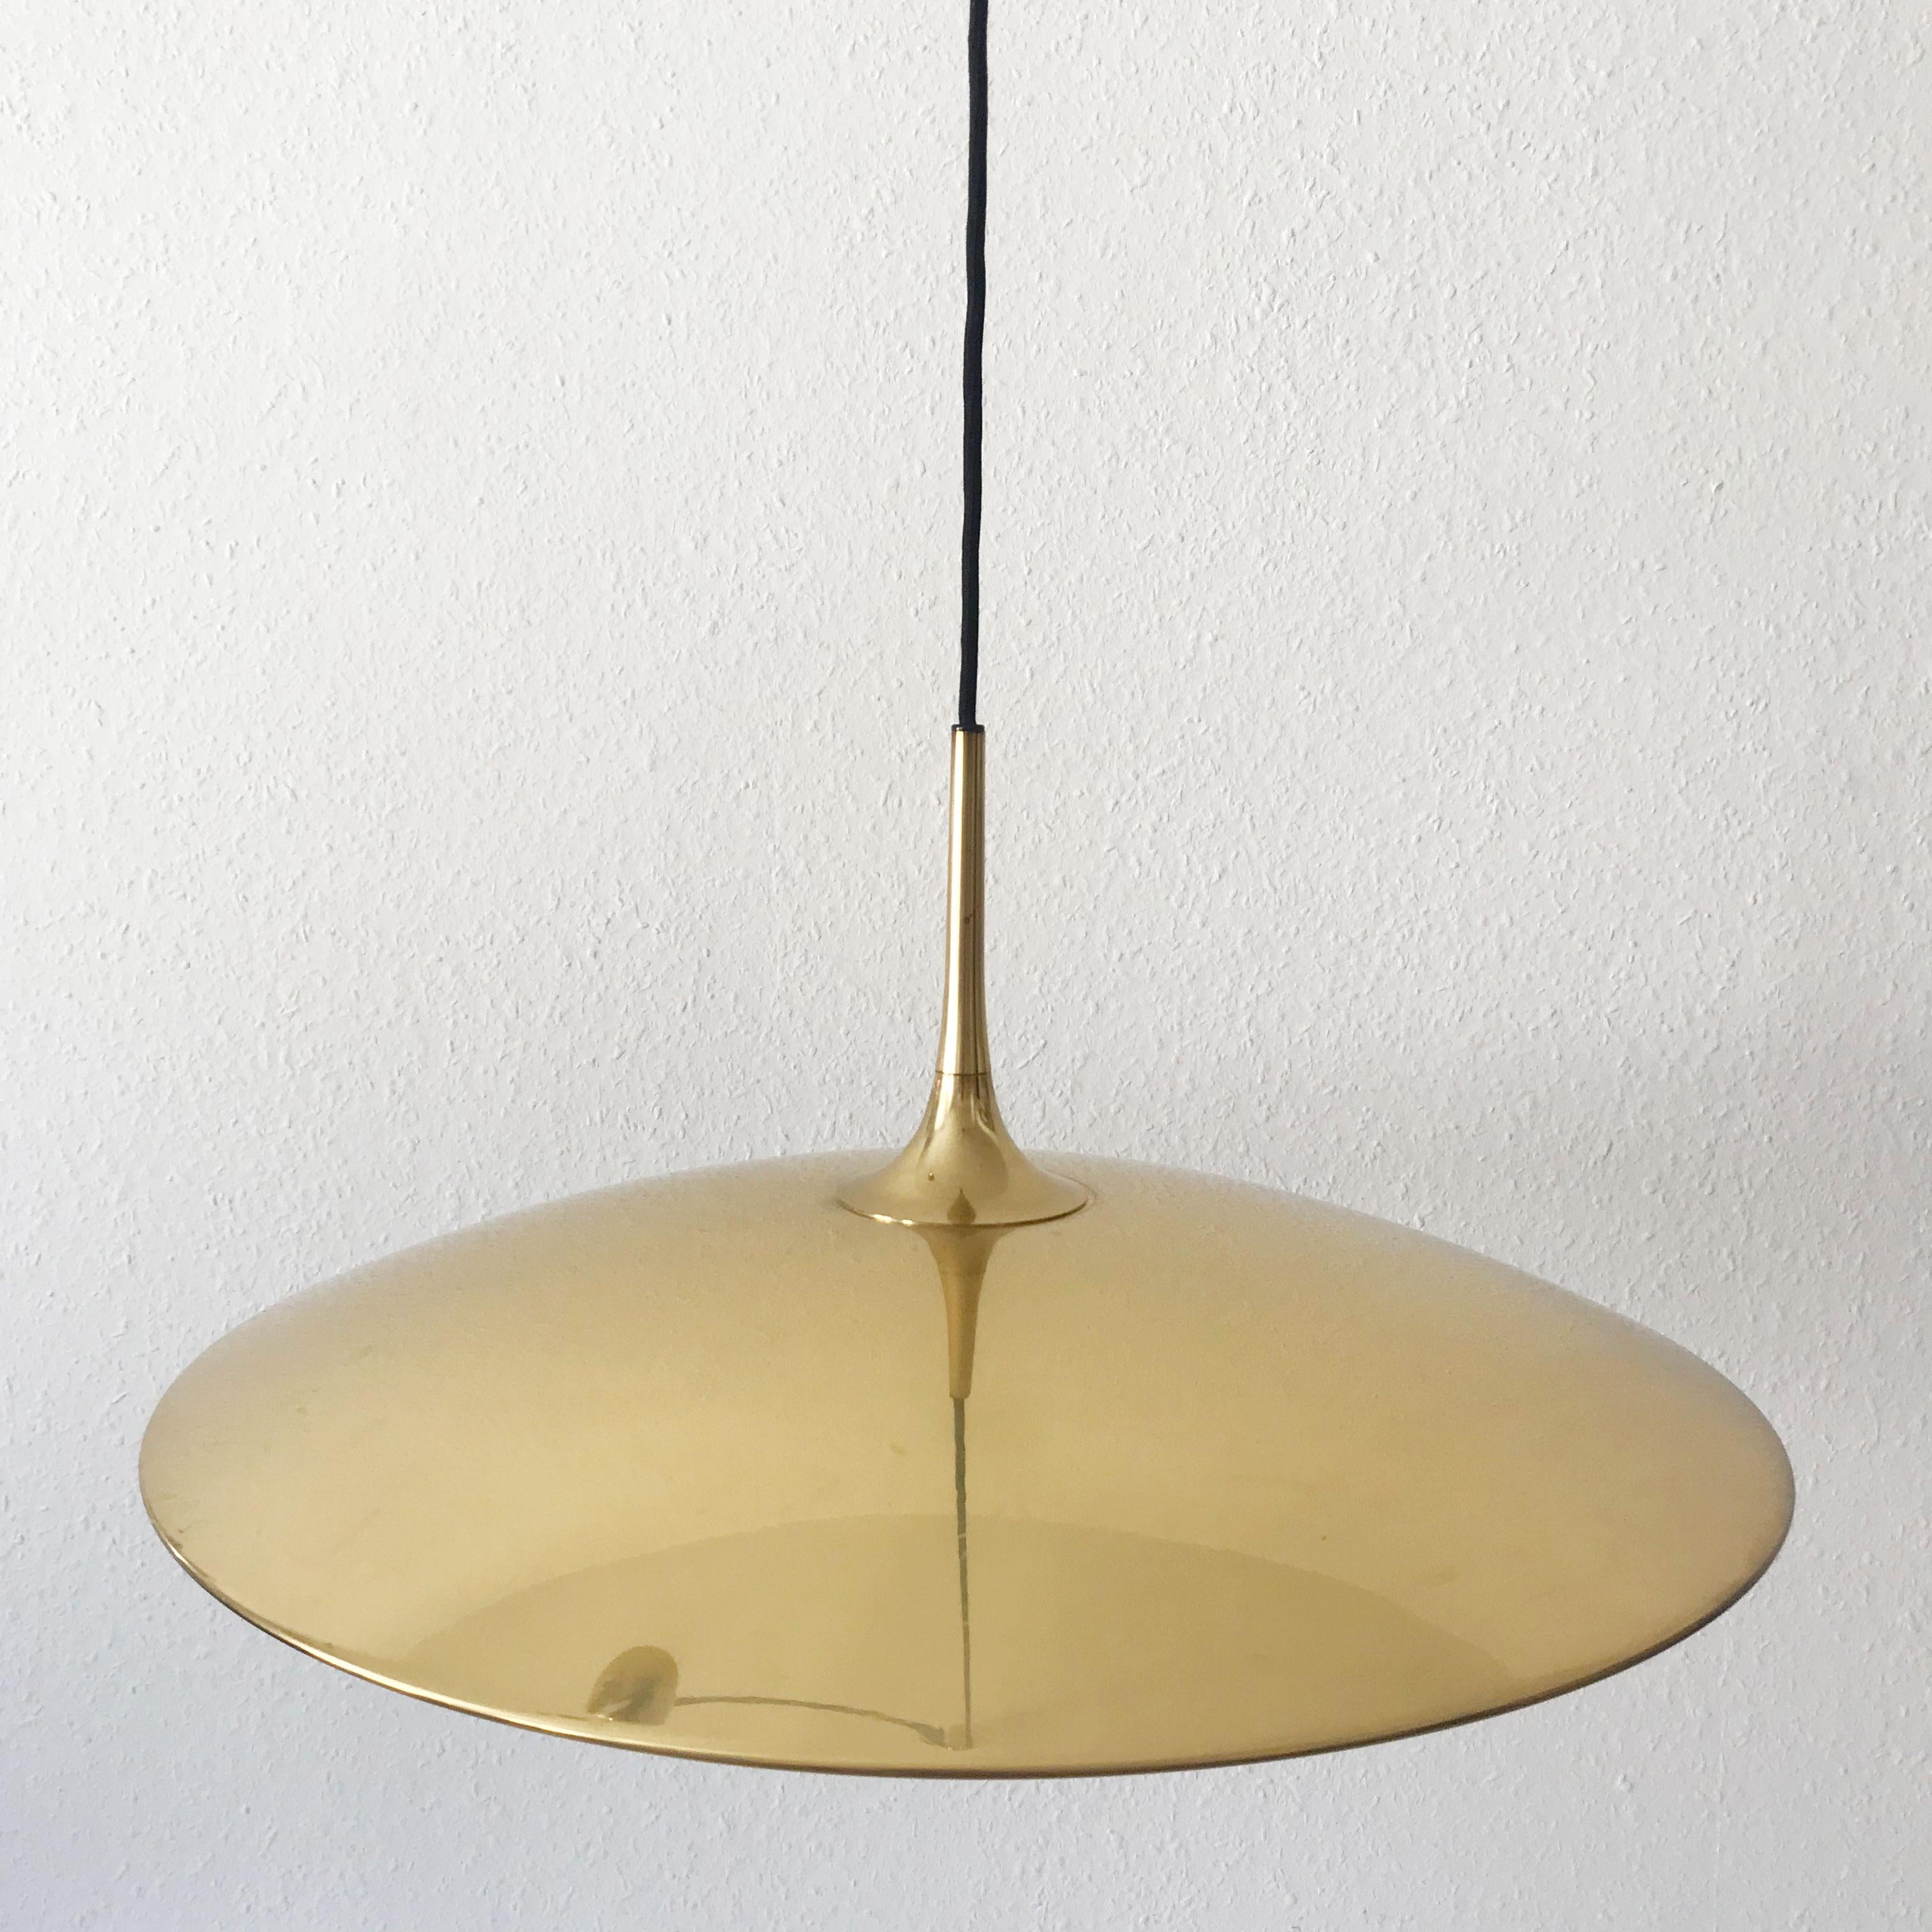 Counter Balance Pendant Lamp Onos 55 by Florian Schulz, 1980s, Germany 12